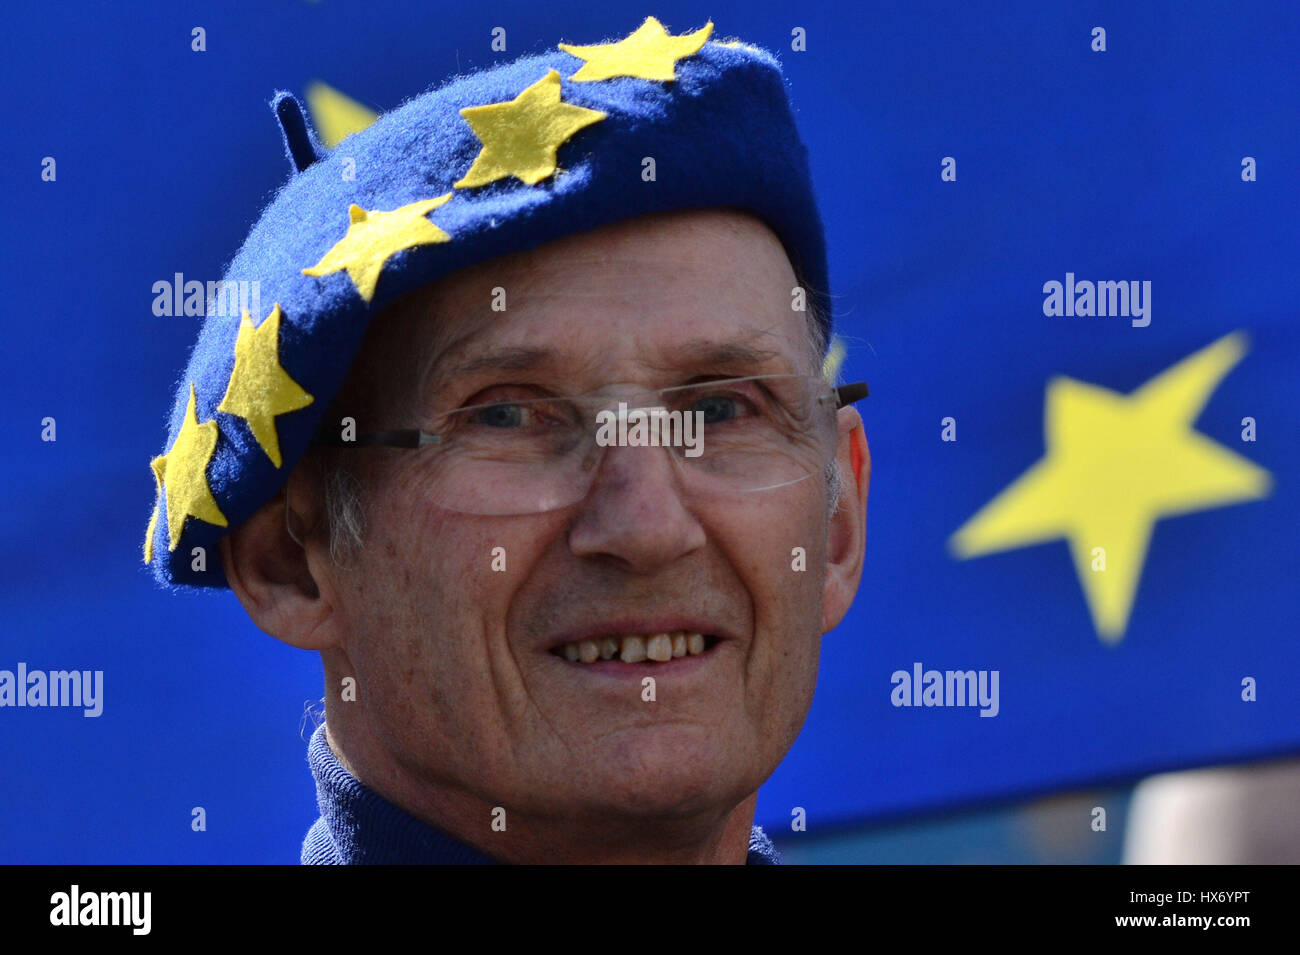 A pro-EU protester taking part in a March for Europe rally against Brexit in central London wears a blue beret with stars symbolising the European Union. Stock Photo